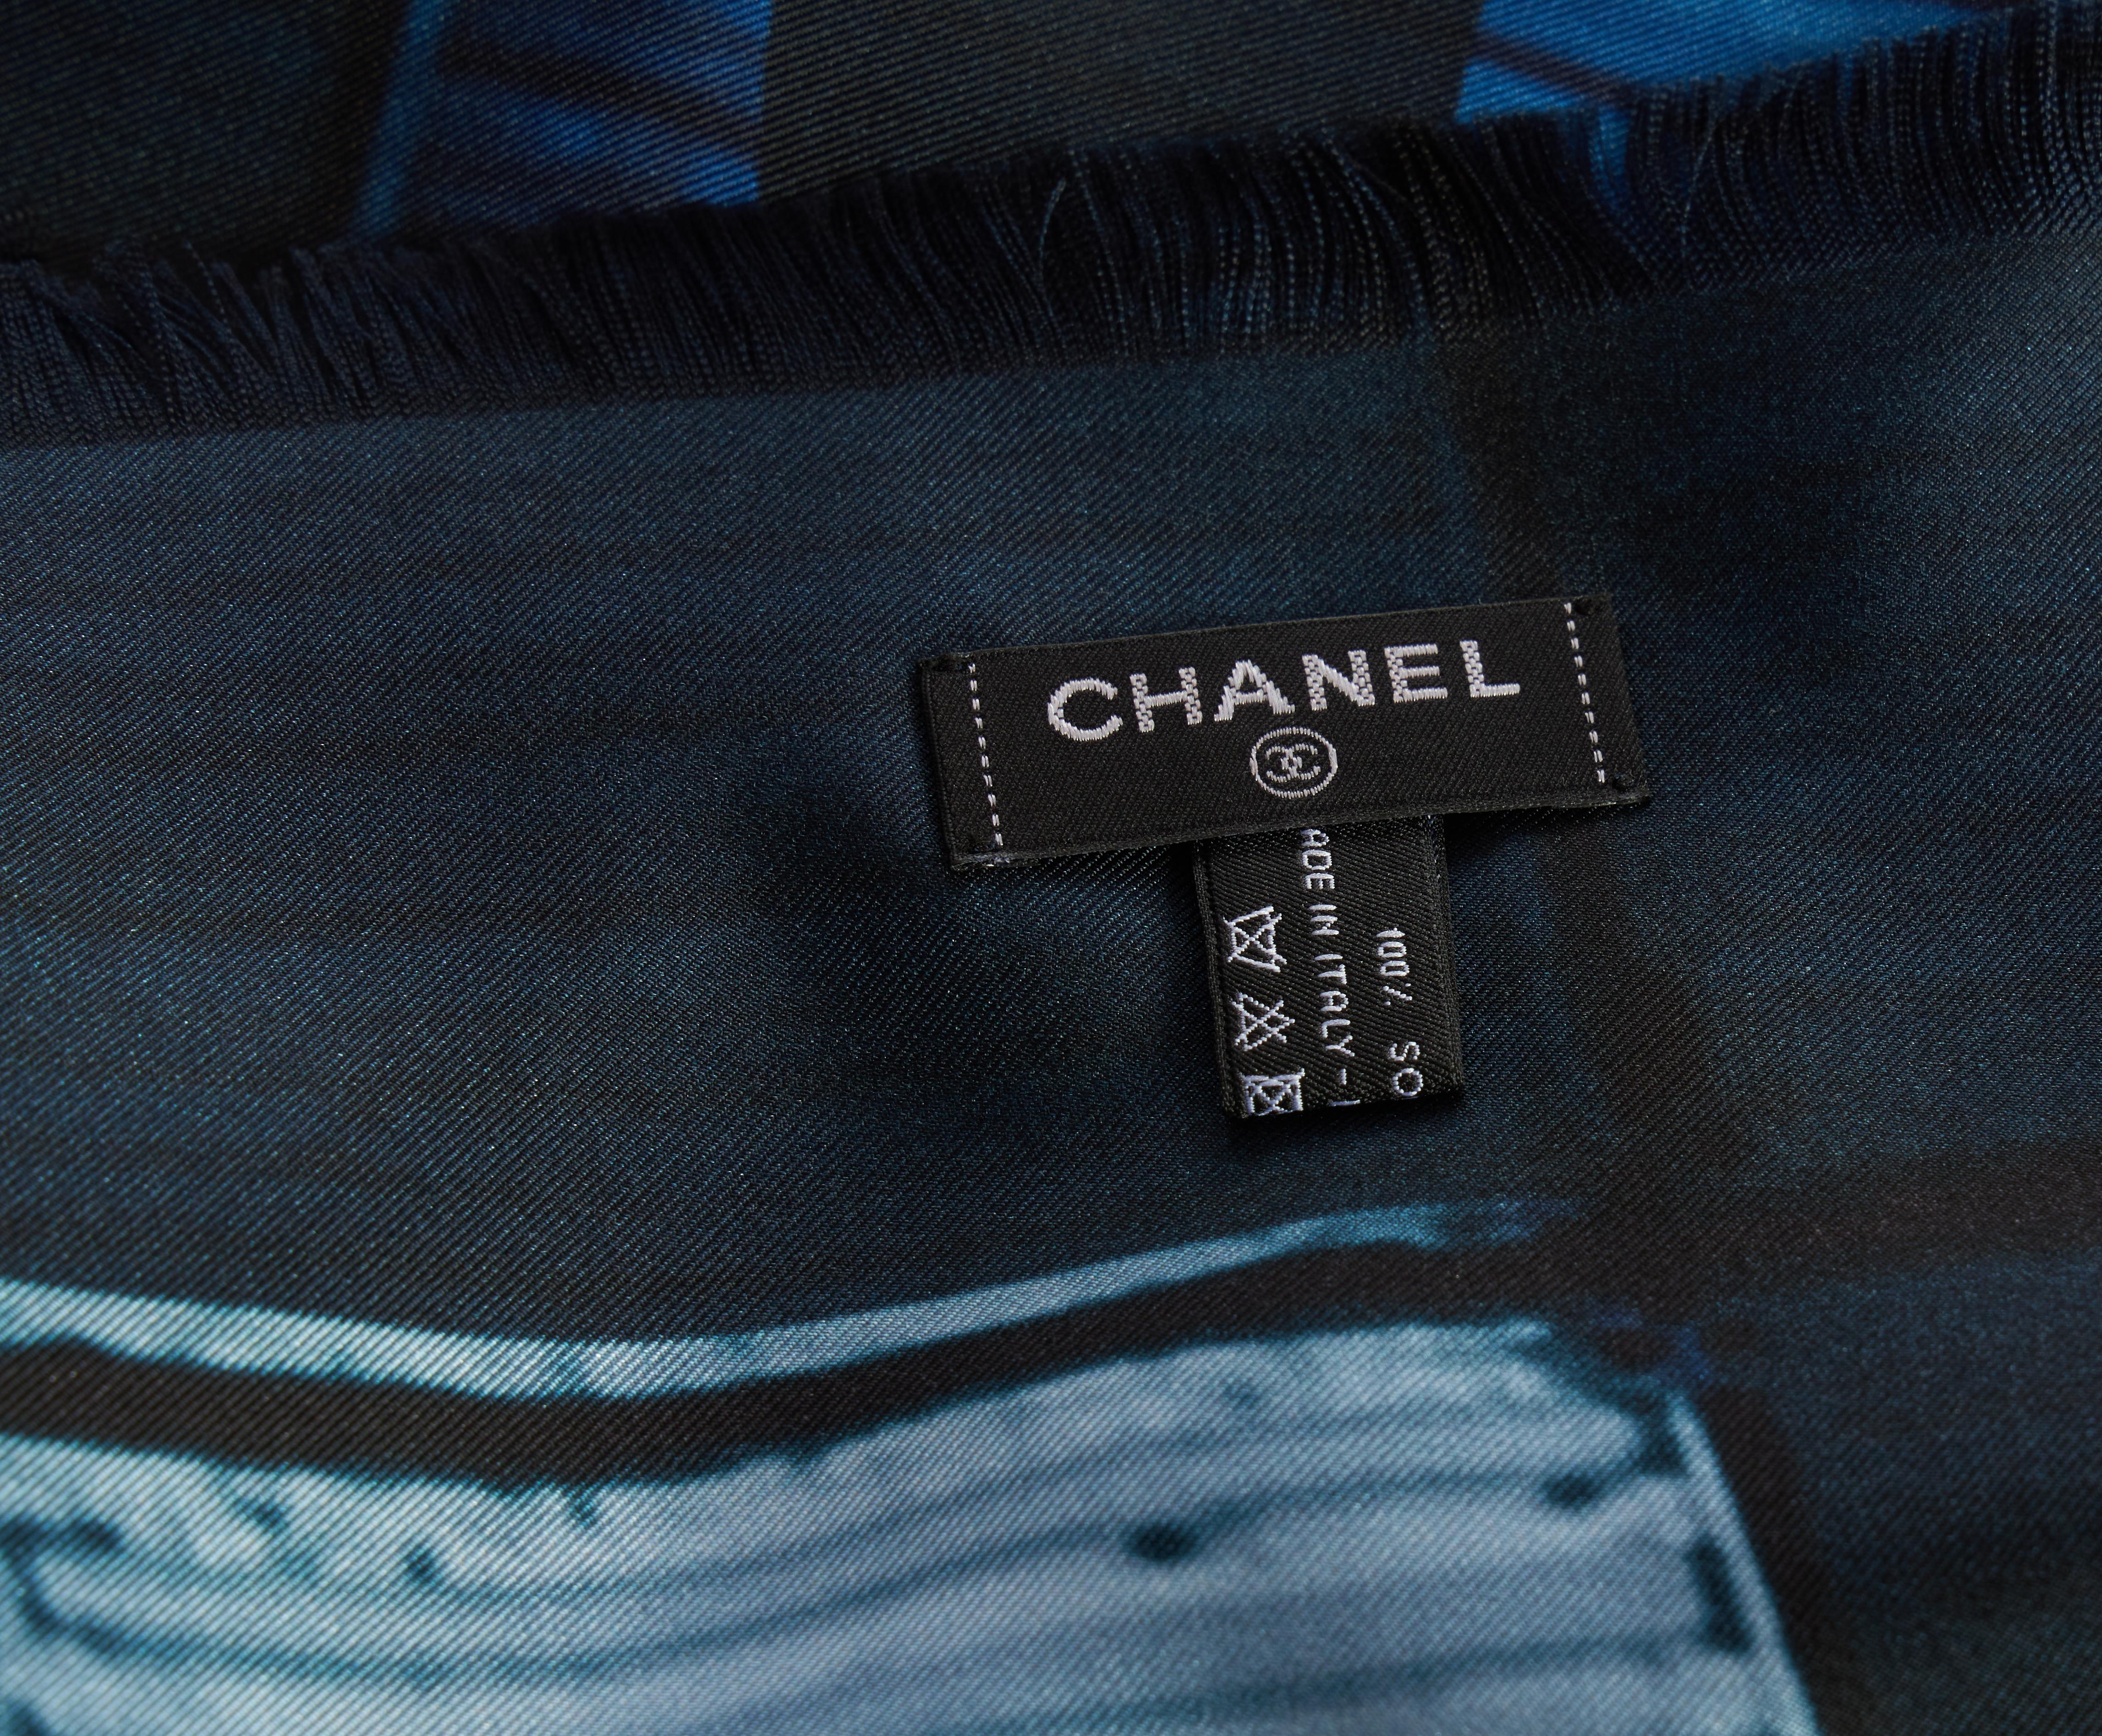 Chanel brand new in unworn condition oversize rust and blue silk 